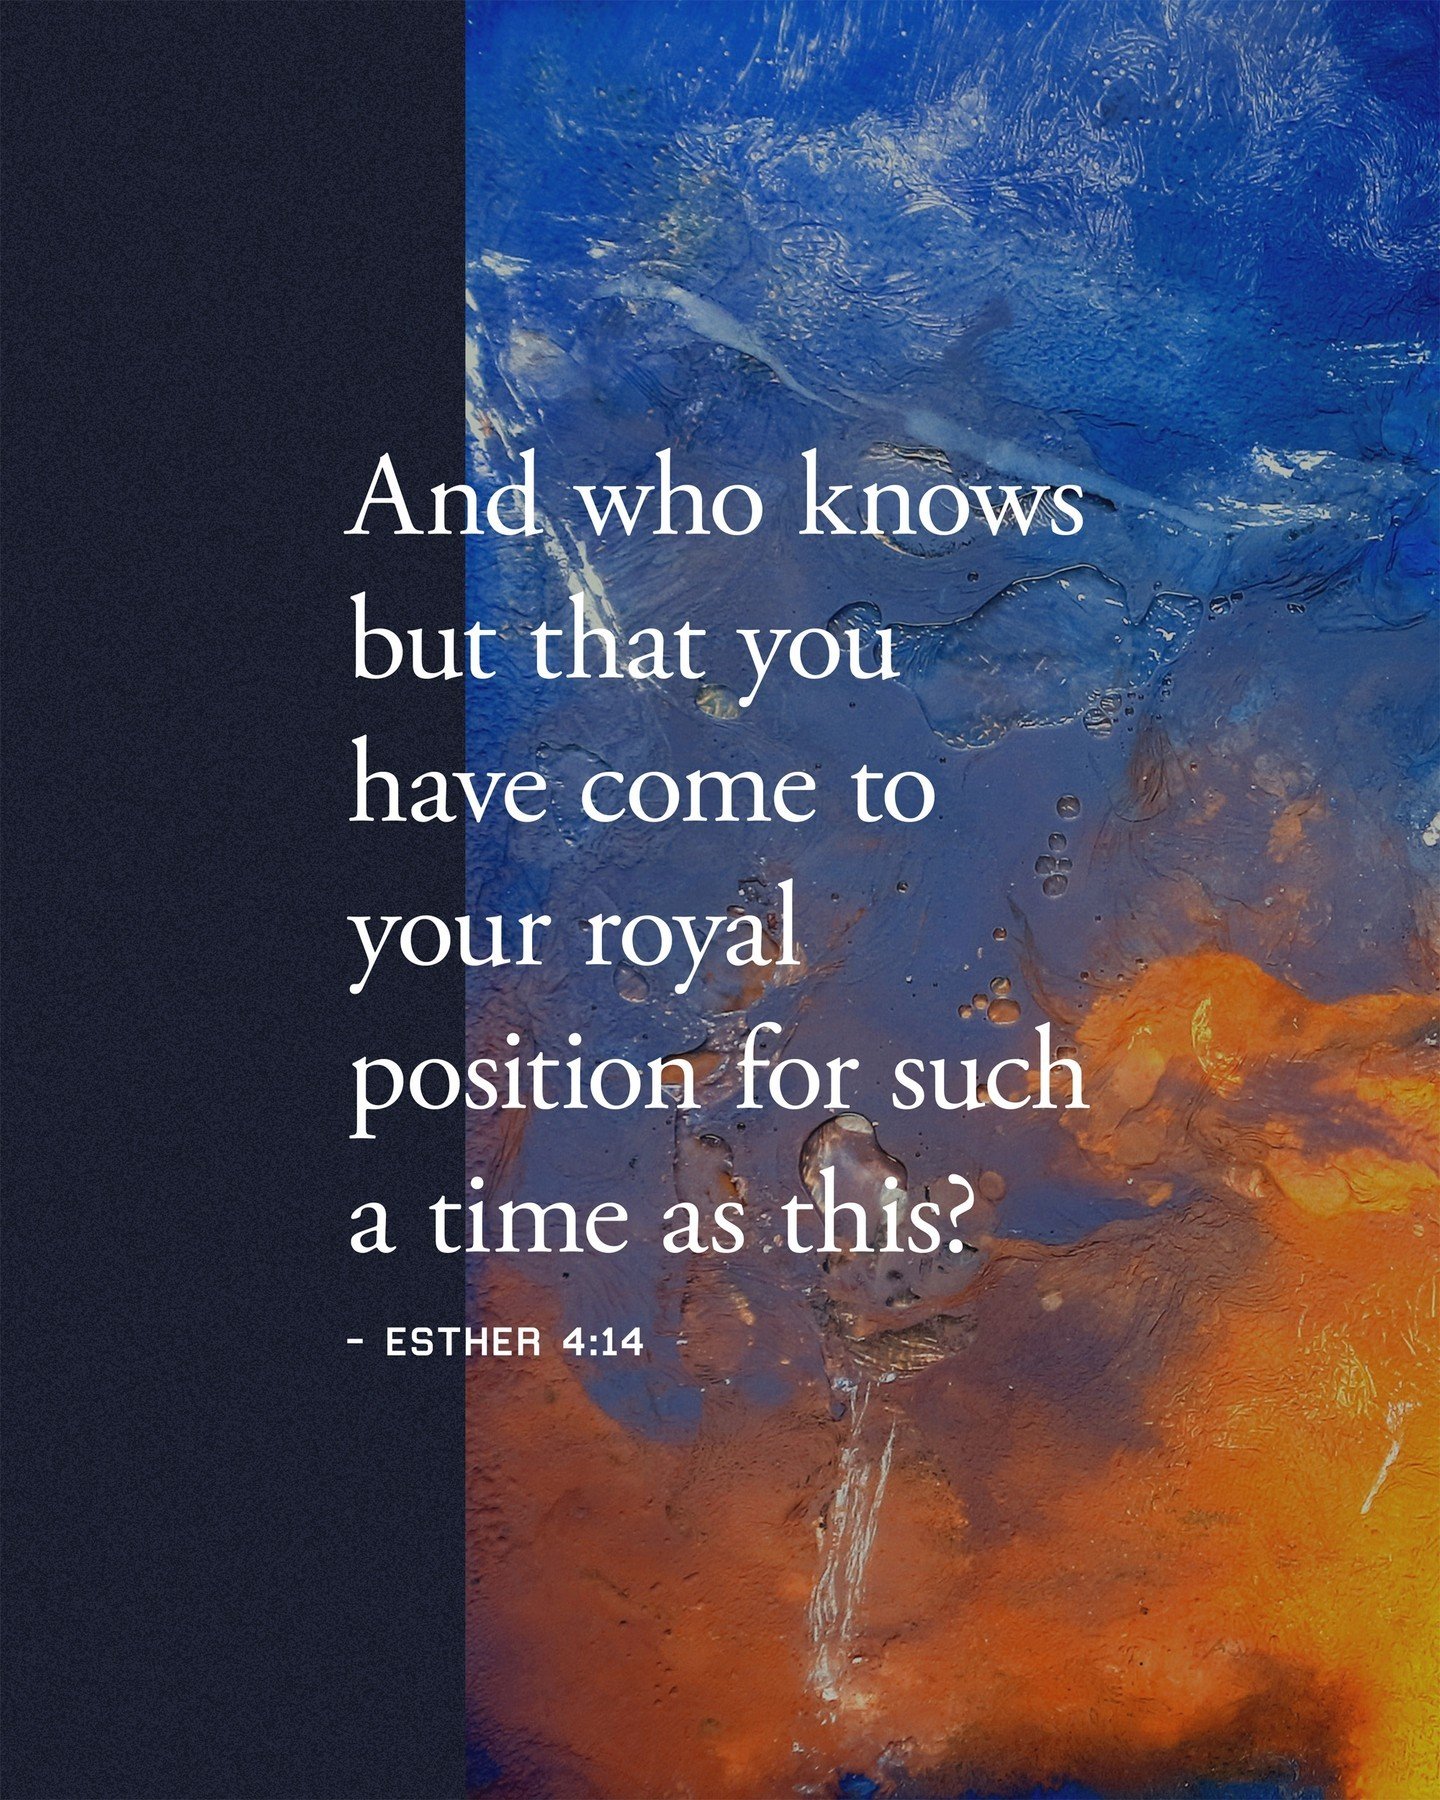 &quot;And who knows but that you have come to your royal position for such a time as this?&quot; - Esther 4:14
.
.
.
#church #god #morning #jesus #christ #love #christian #worship #bible #esther